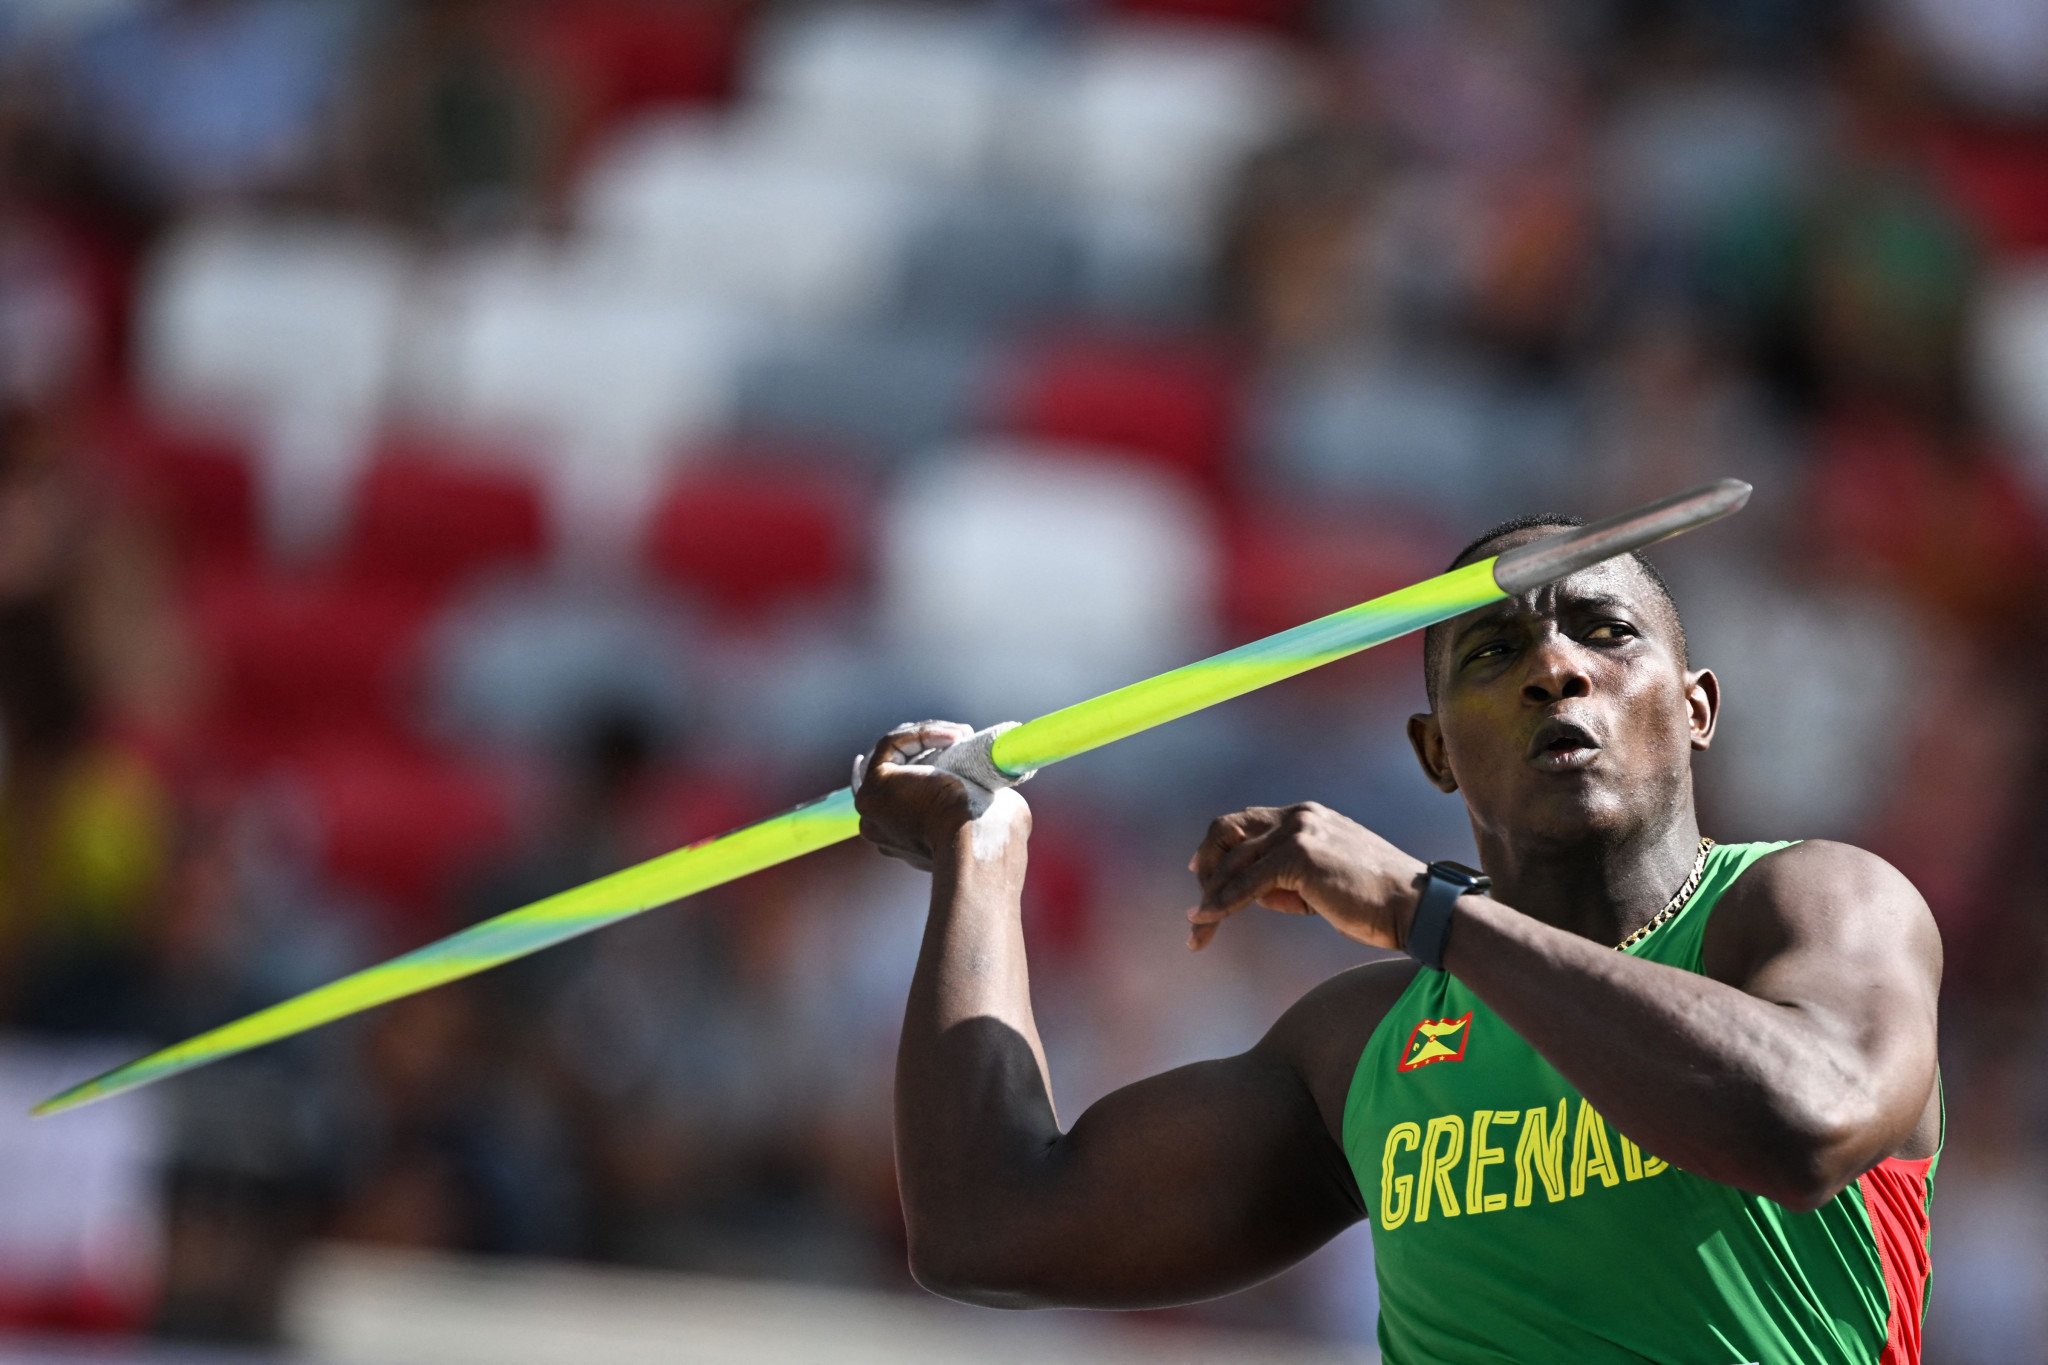 Back-to-back men's javelin throw champion Anderson Peters of Grenada failed to progress through qualification in Budapest ©Getty Images